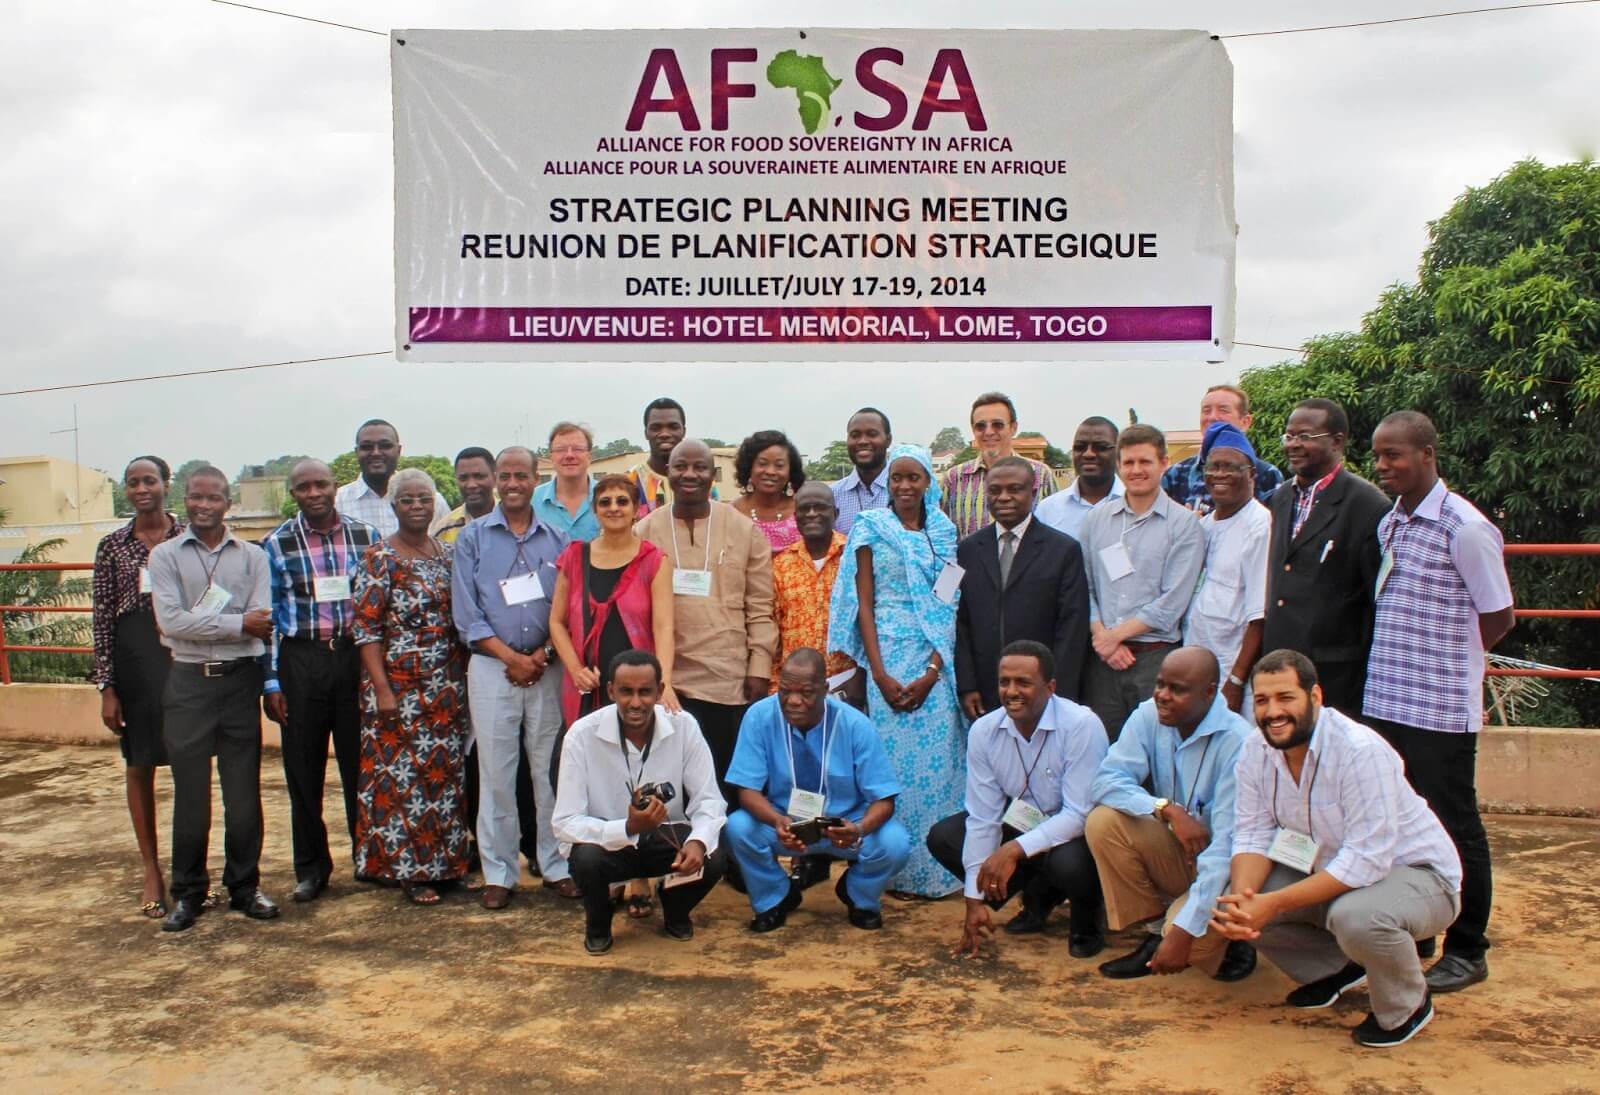 afsa meeting family picture